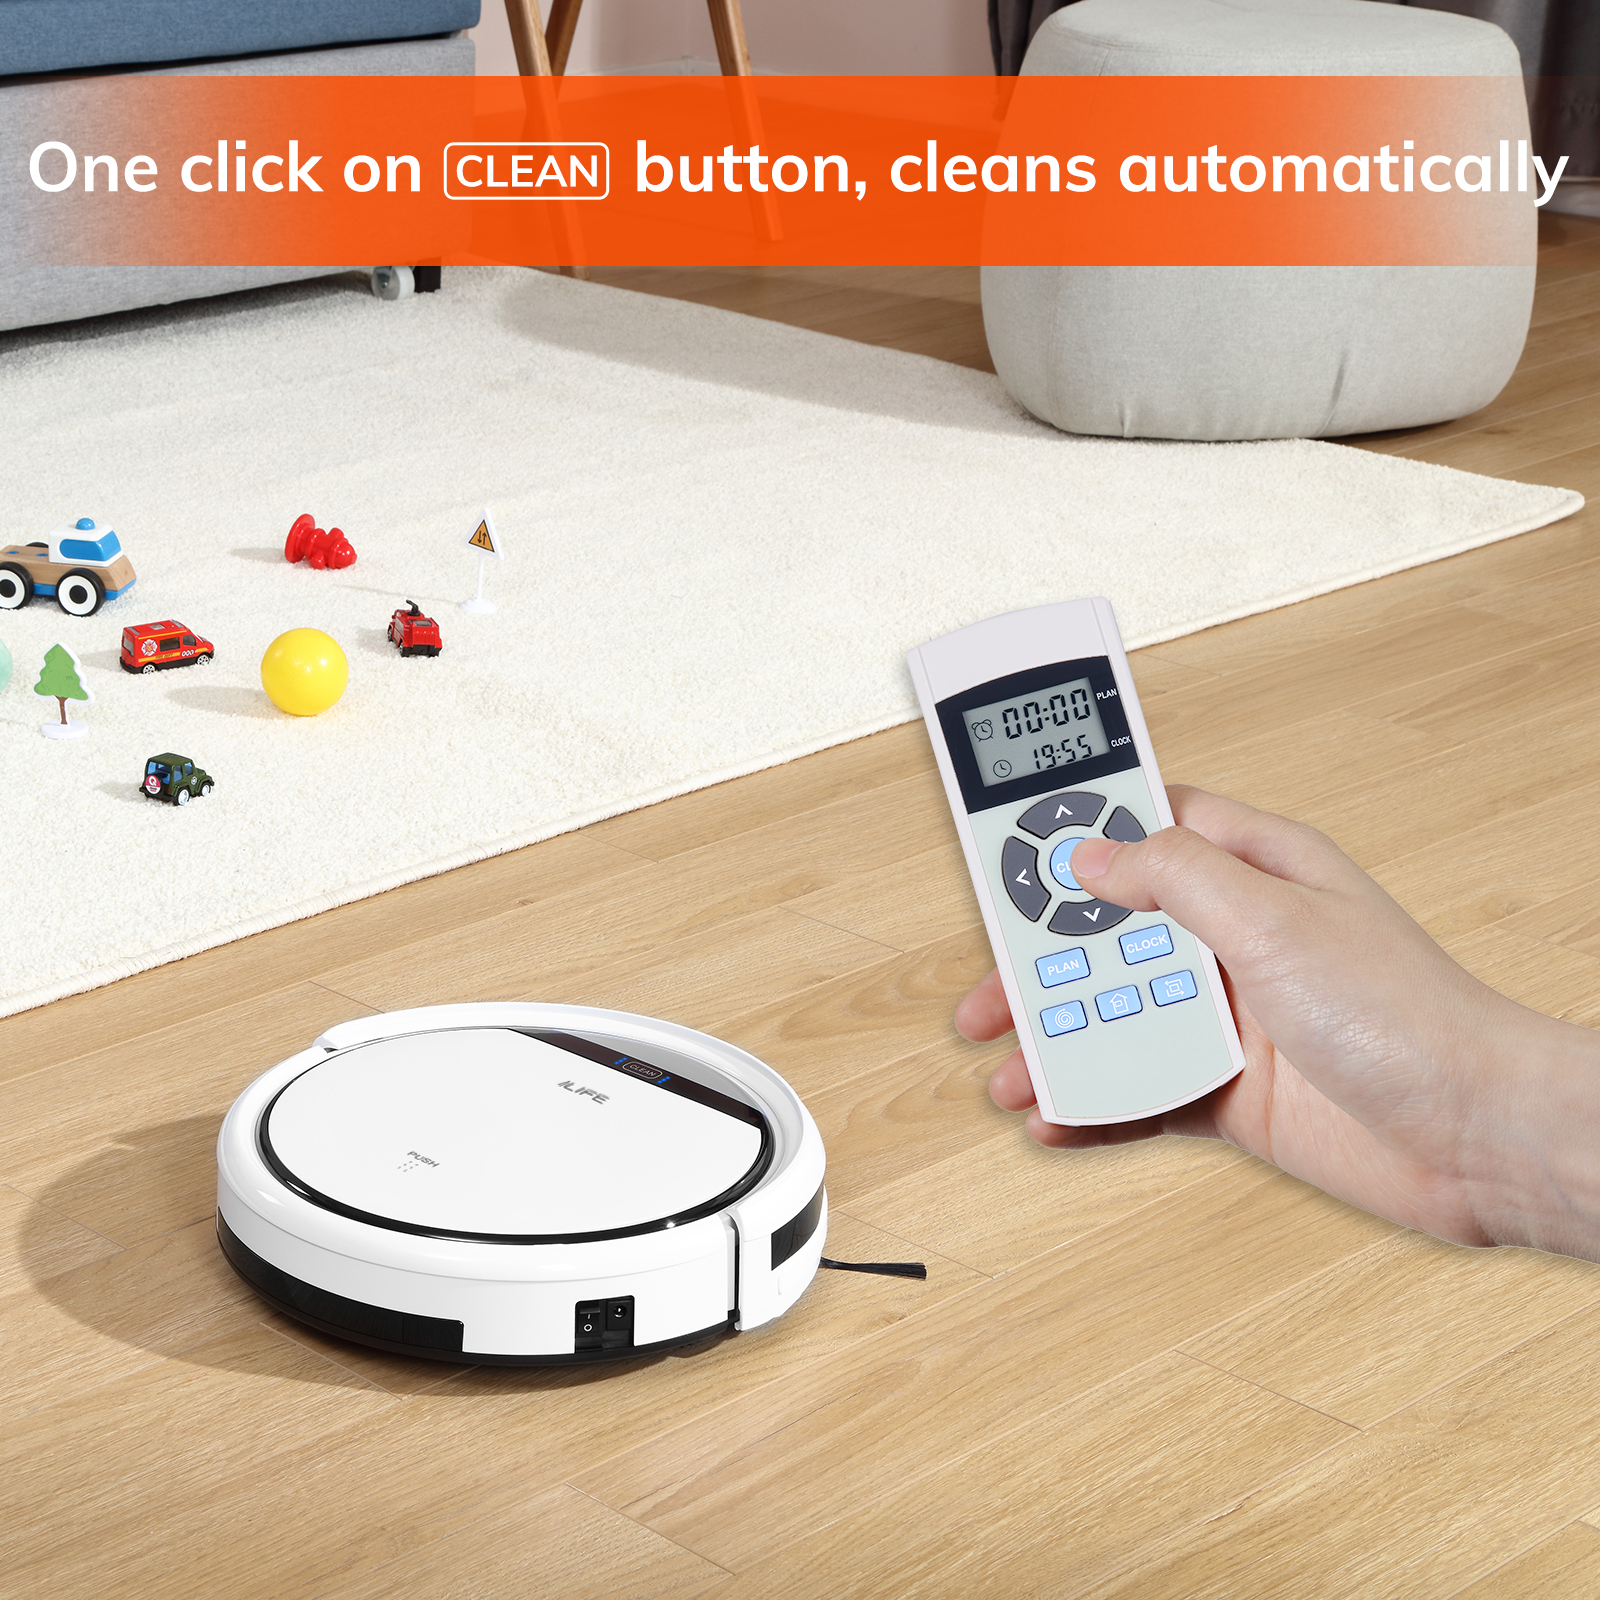 ILIFE V3sPro Robotic Vacuum Cleaner With Power Suction Great for Pet Shedding - image 5 of 6